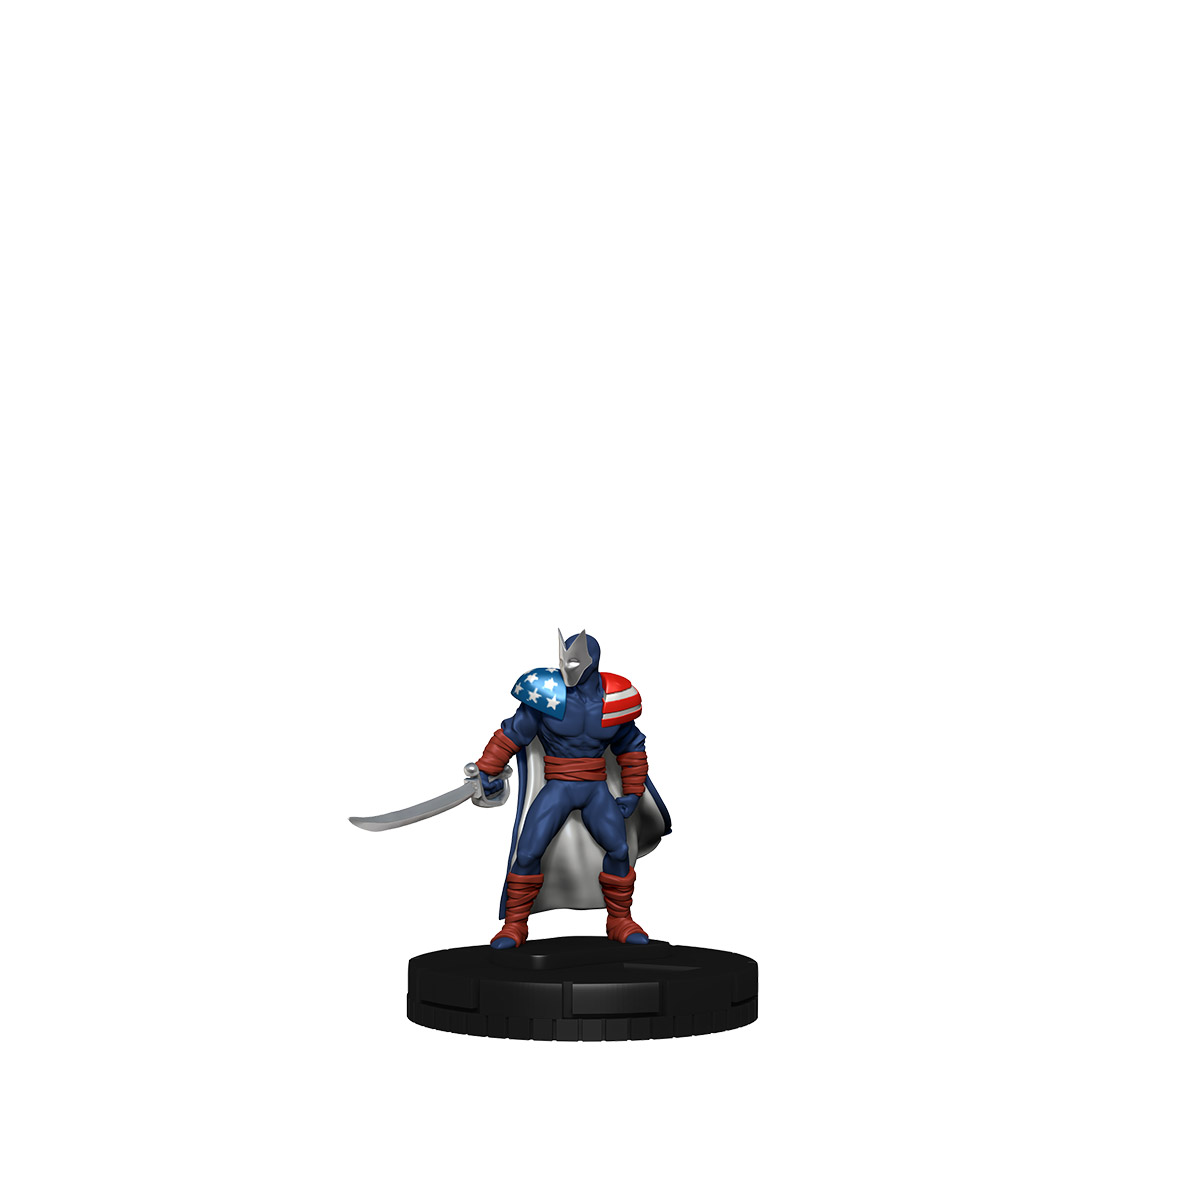 #036 Citizen V Captain America and the Avengers HeroClix